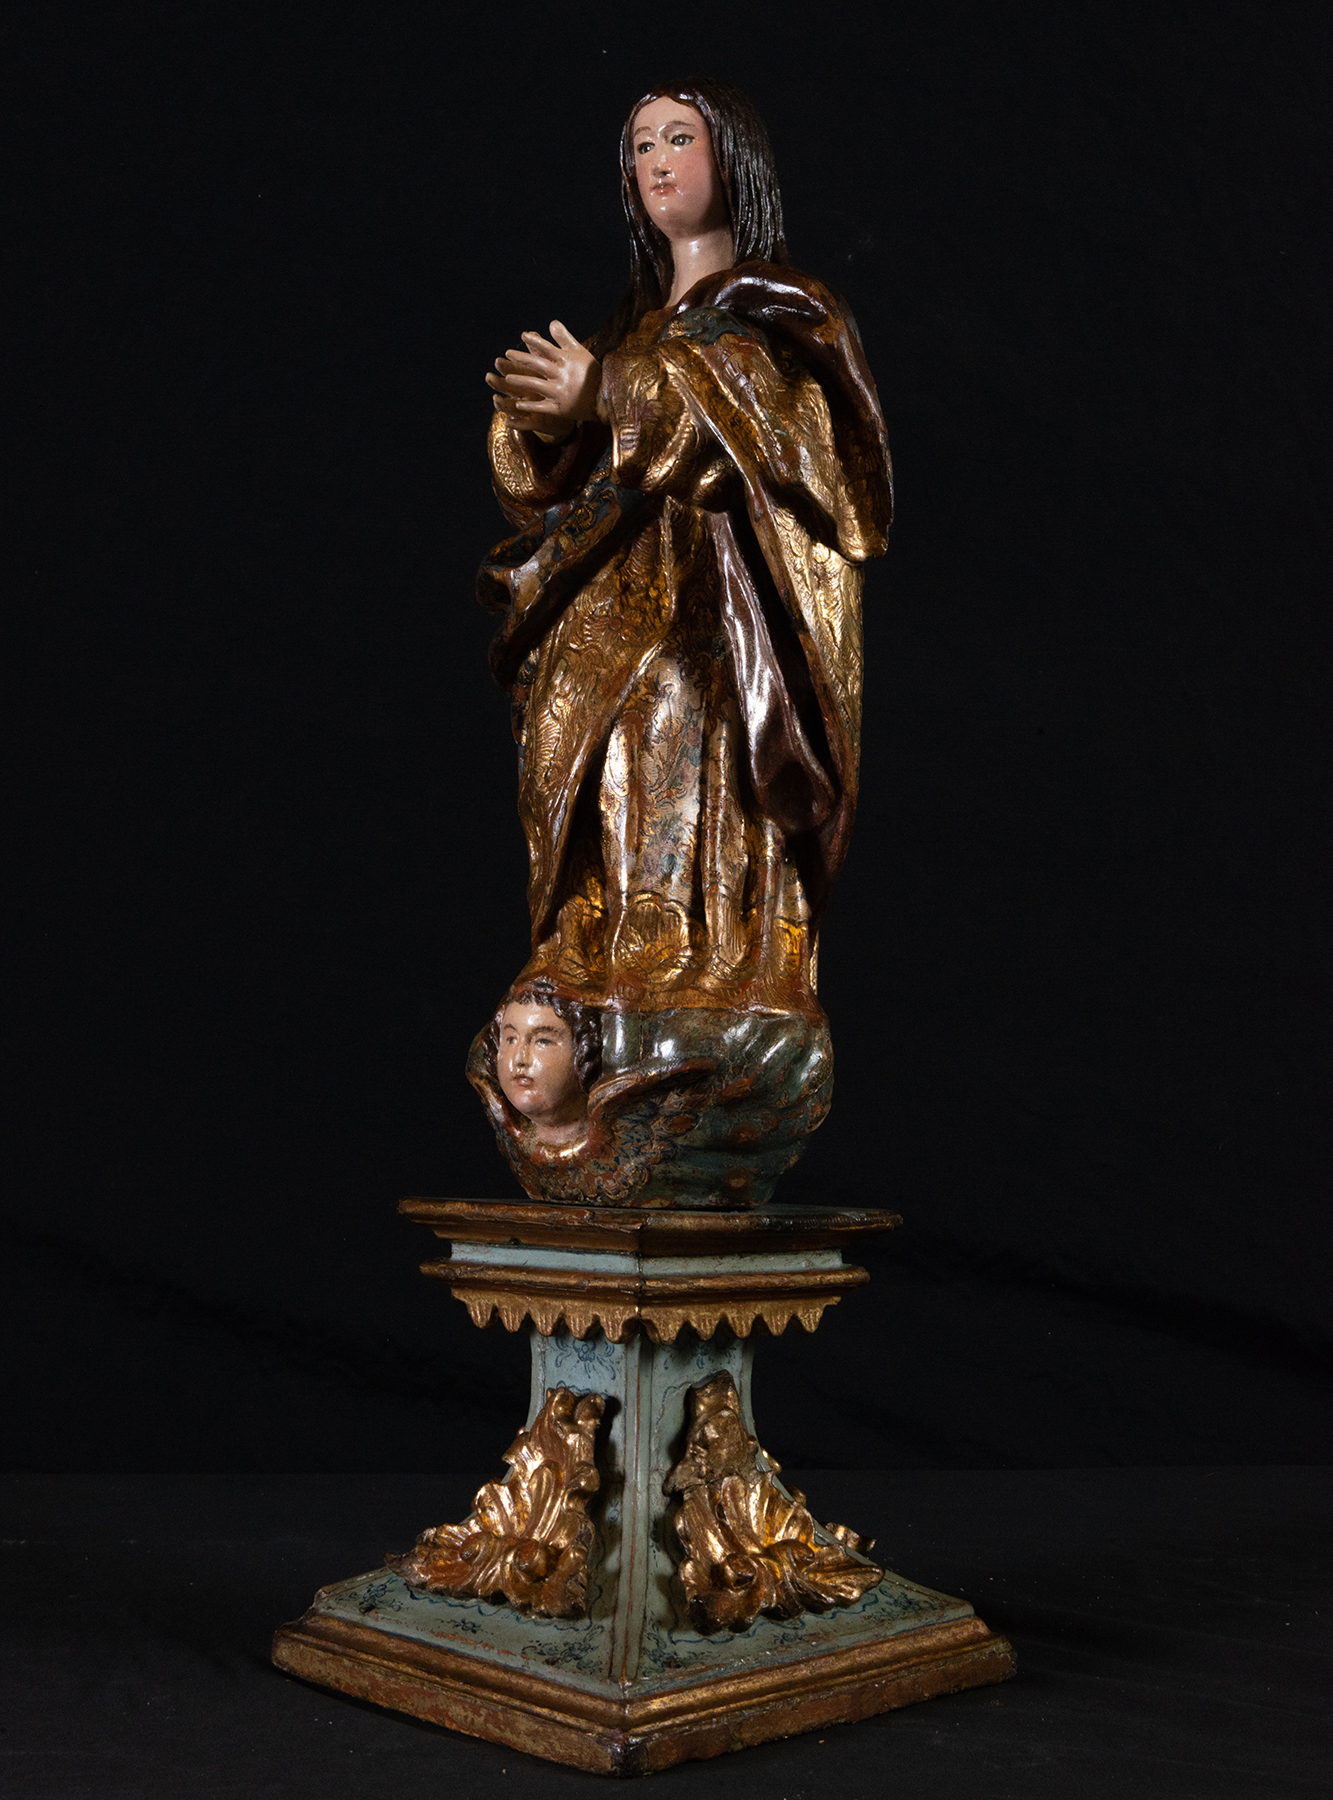 Immaculate Virgin of New Spain, 17th century Mexican colonial work, possibly Puebla - Image 3 of 6